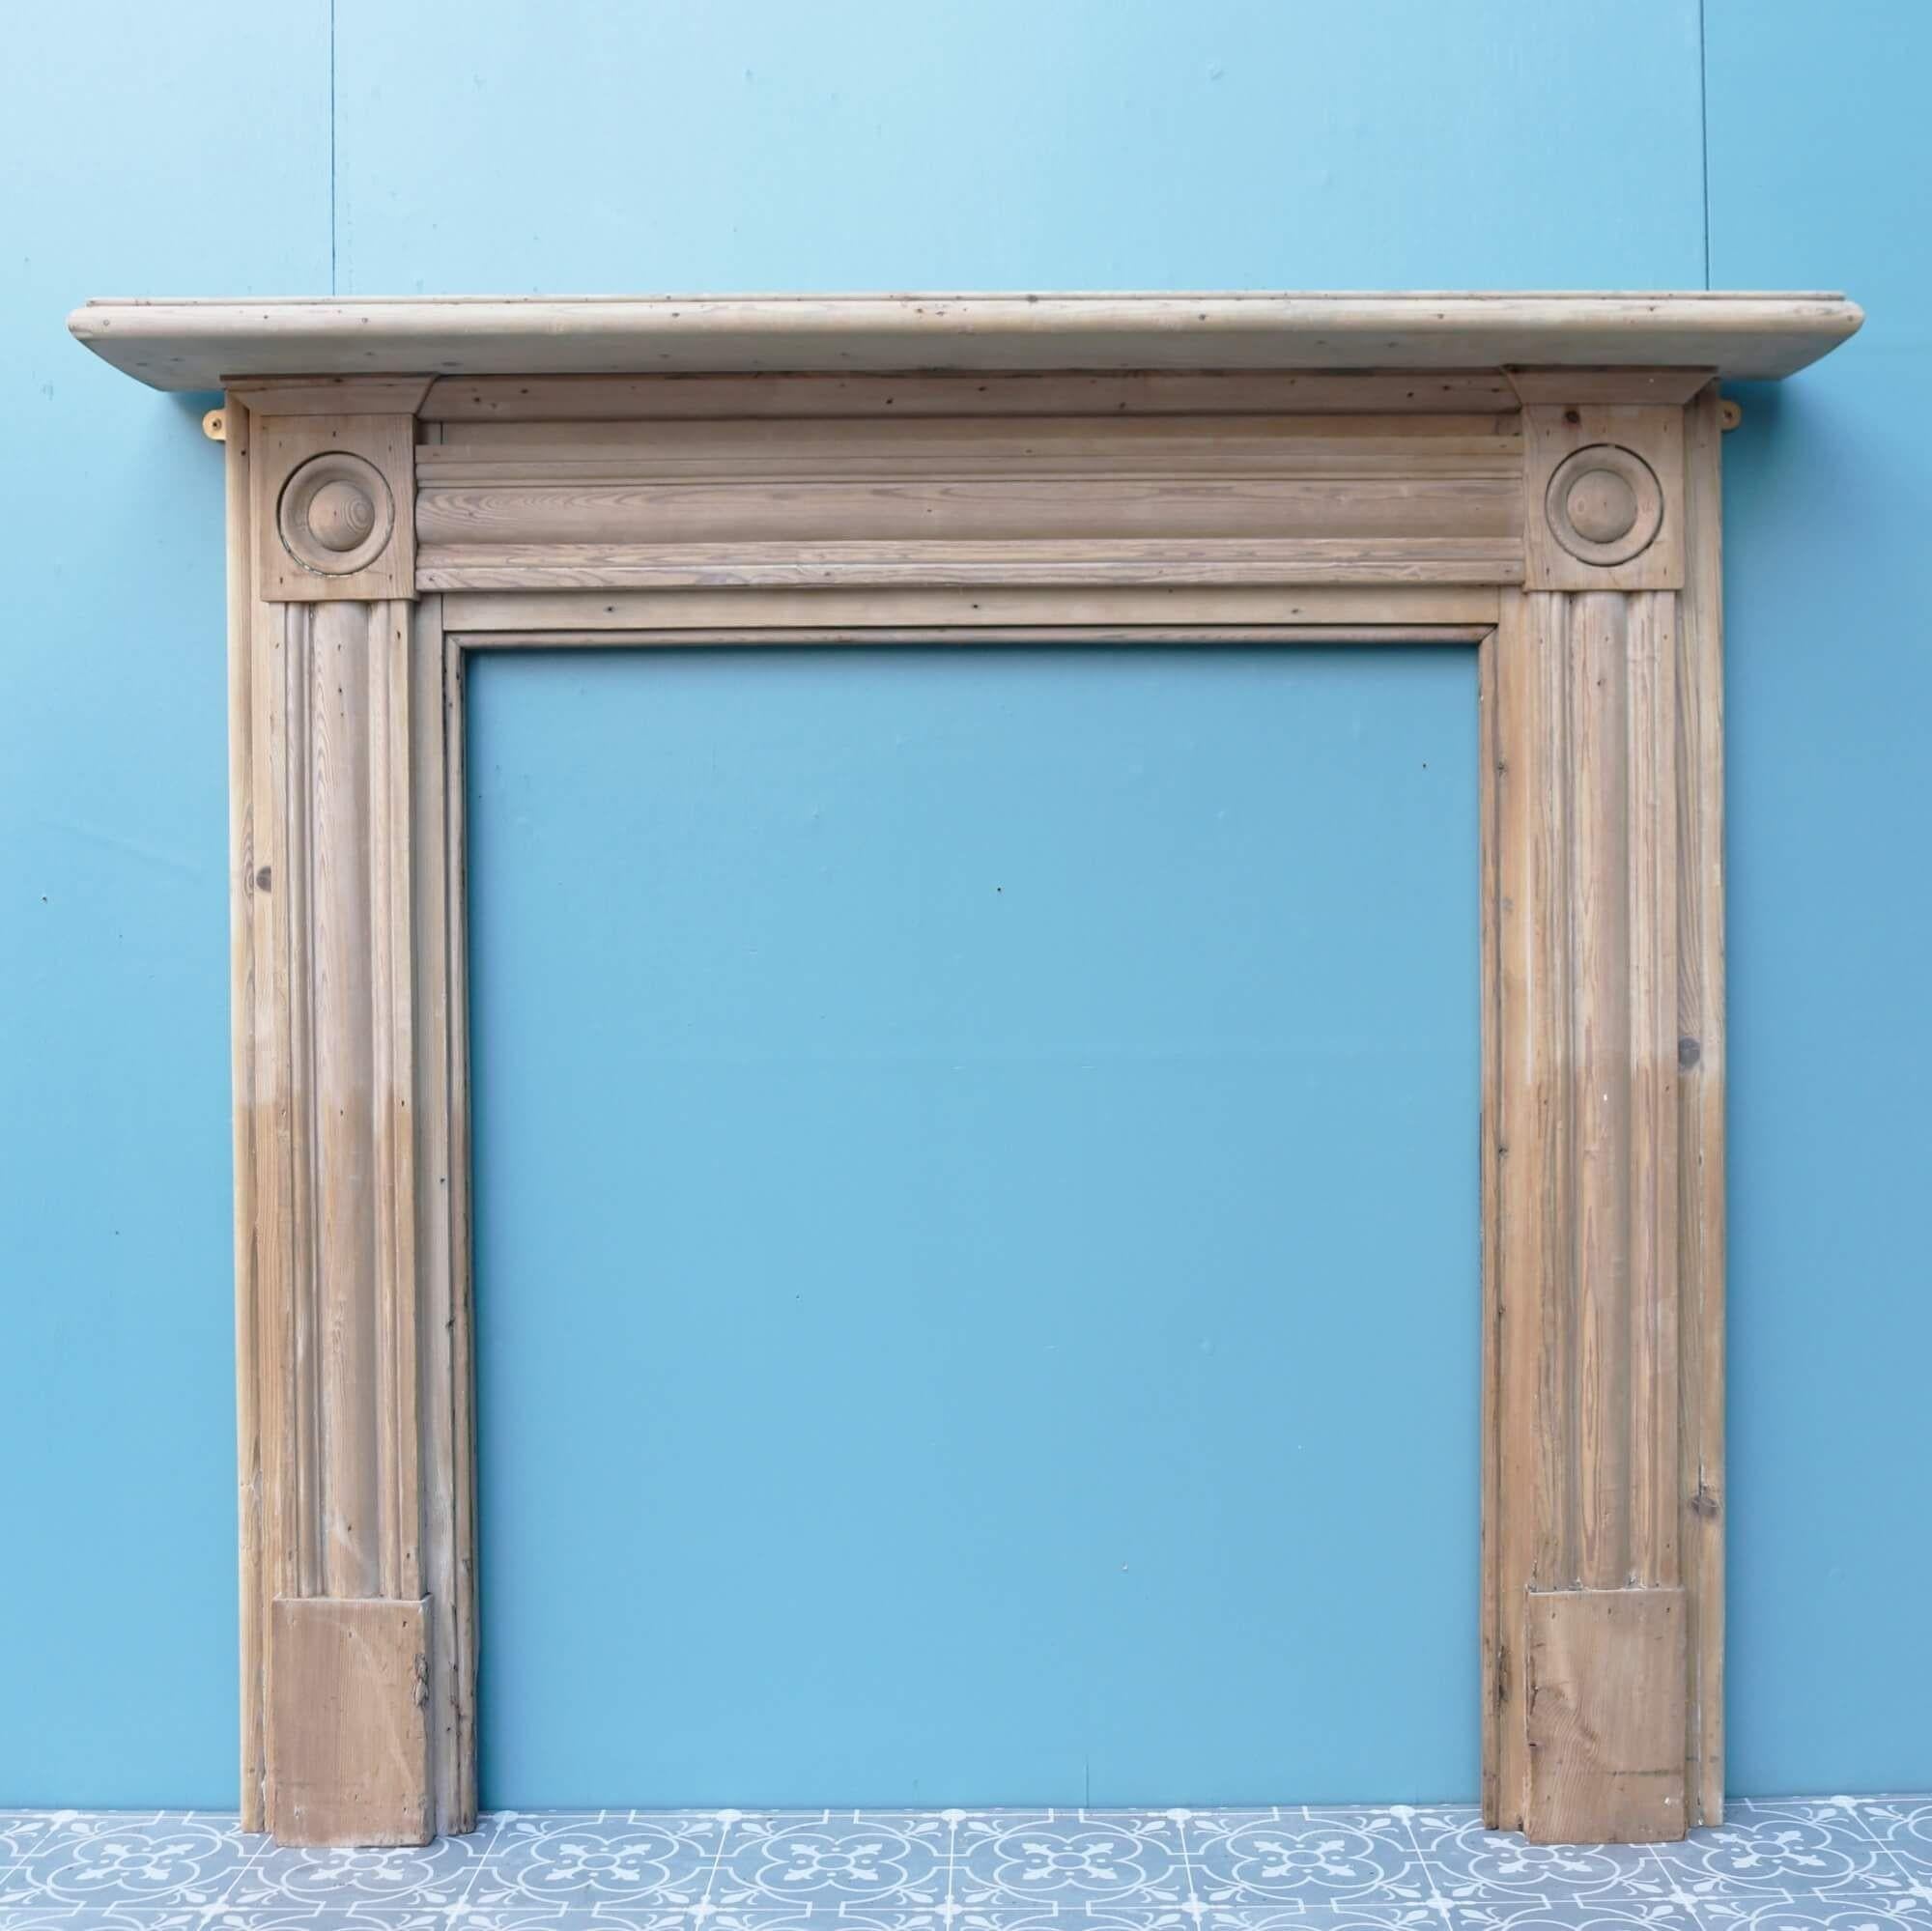 This pine bullseye fireplace is more than 200 years old. Though the design is simple, the Georgian style surround speaks volumes in an interior, ornamented with round ‘bullseye’ details on each end block alongside a moulded frieze and